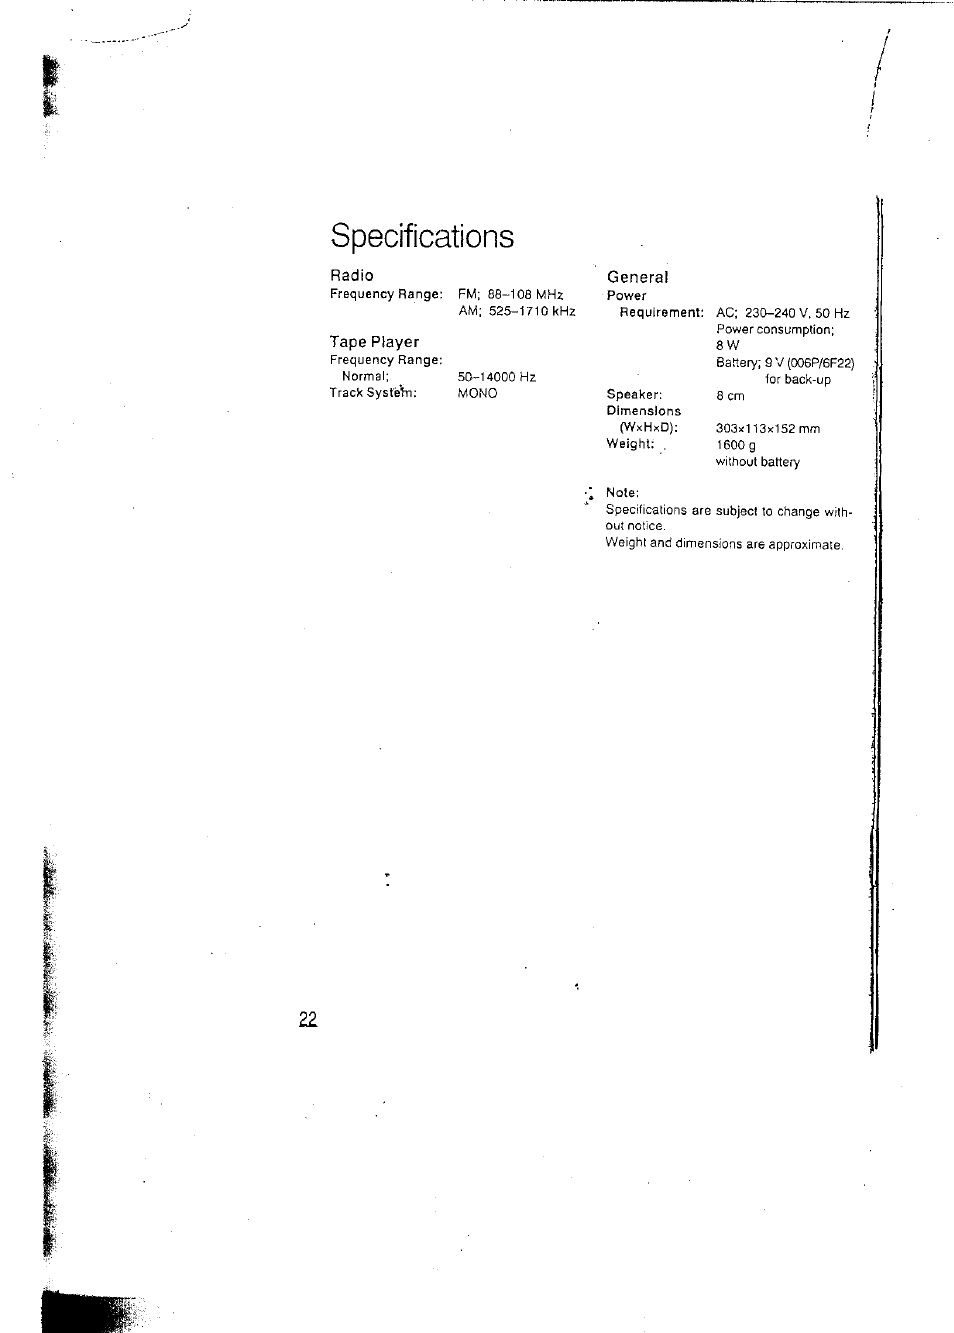 Specifications | Panasonic RCX160 User Manual | Page 22 / 23